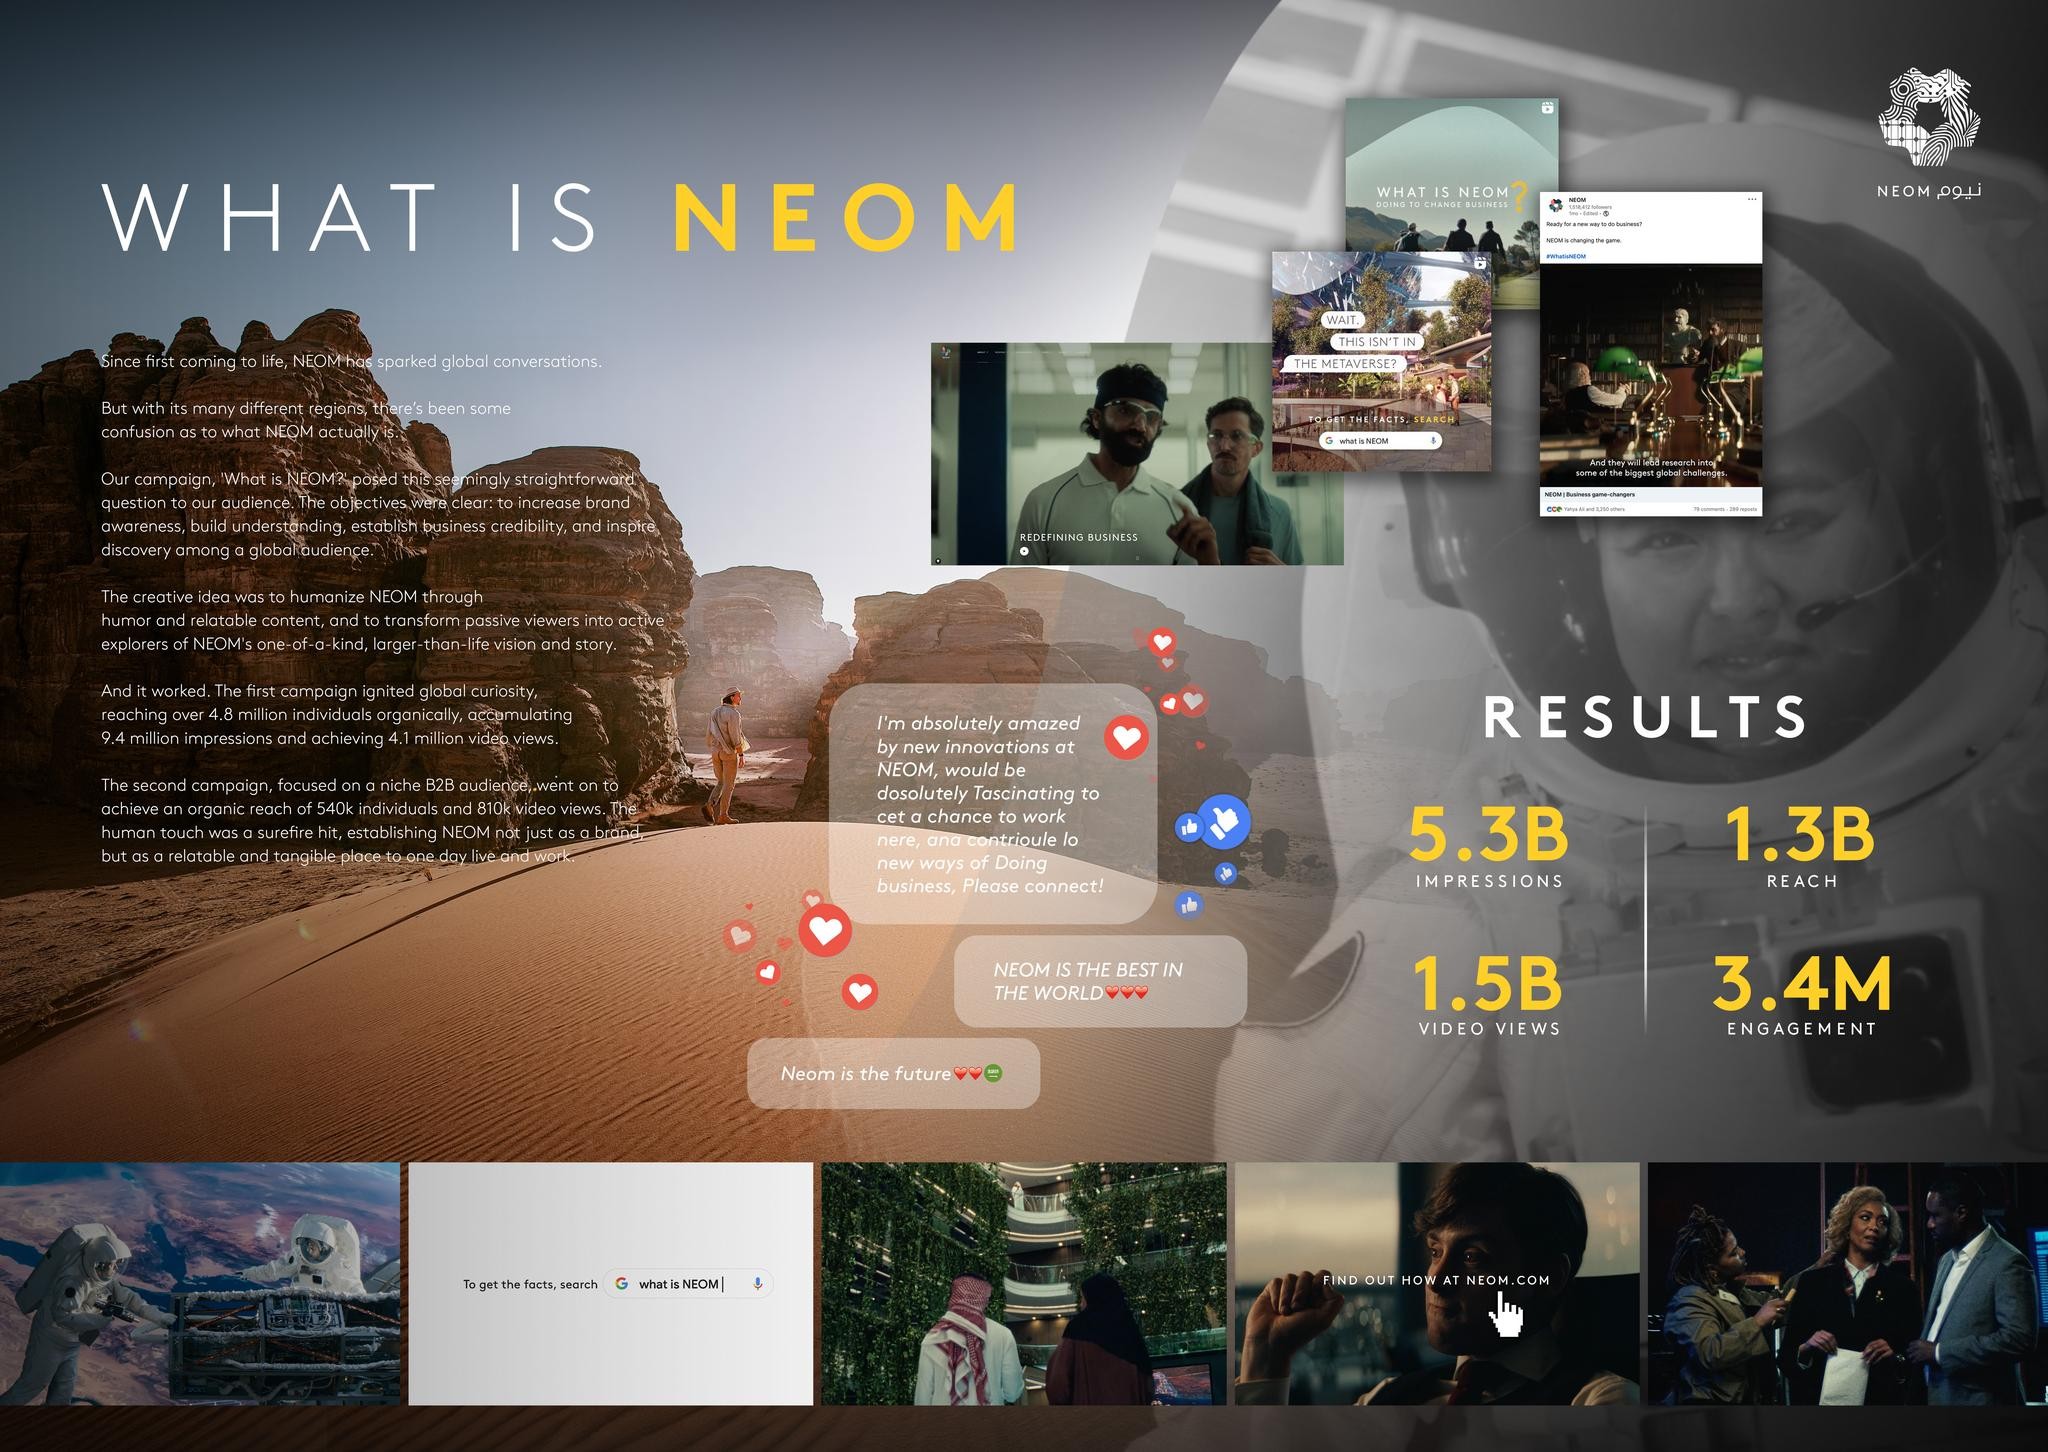 WHAT IS NEOM